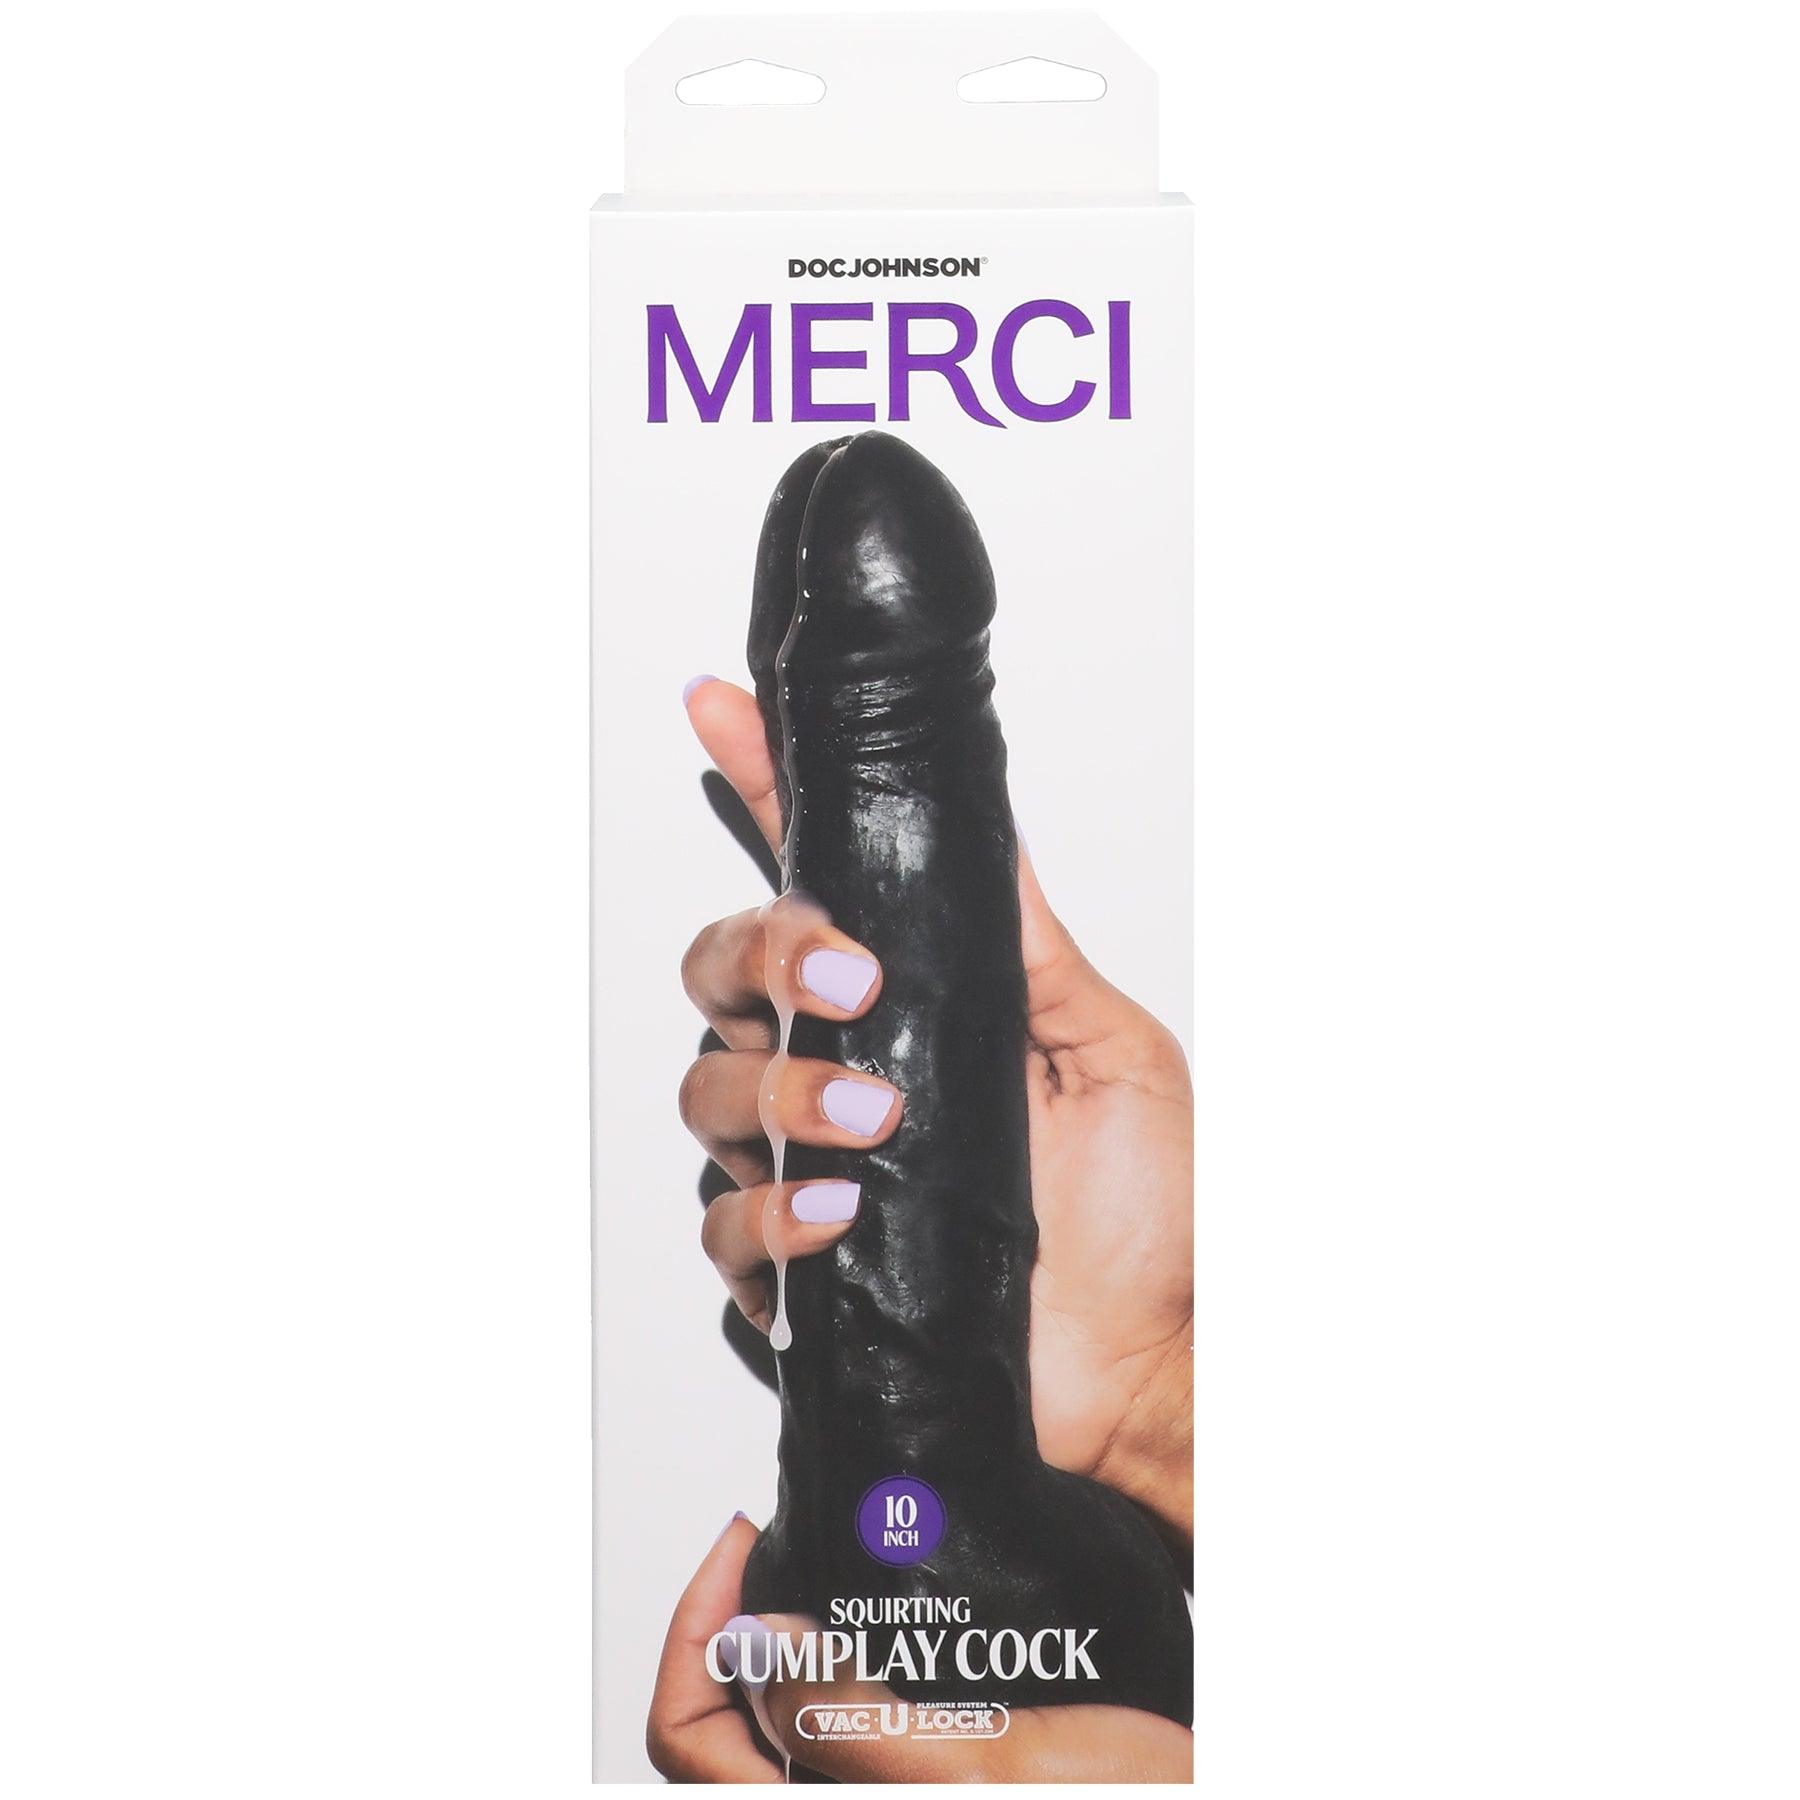 Merci - 10 Inch Dual Density Squirting Cumplay Cock With Removable Vac-U-Lock Suction Cup - Black - My Sex Toy Hub